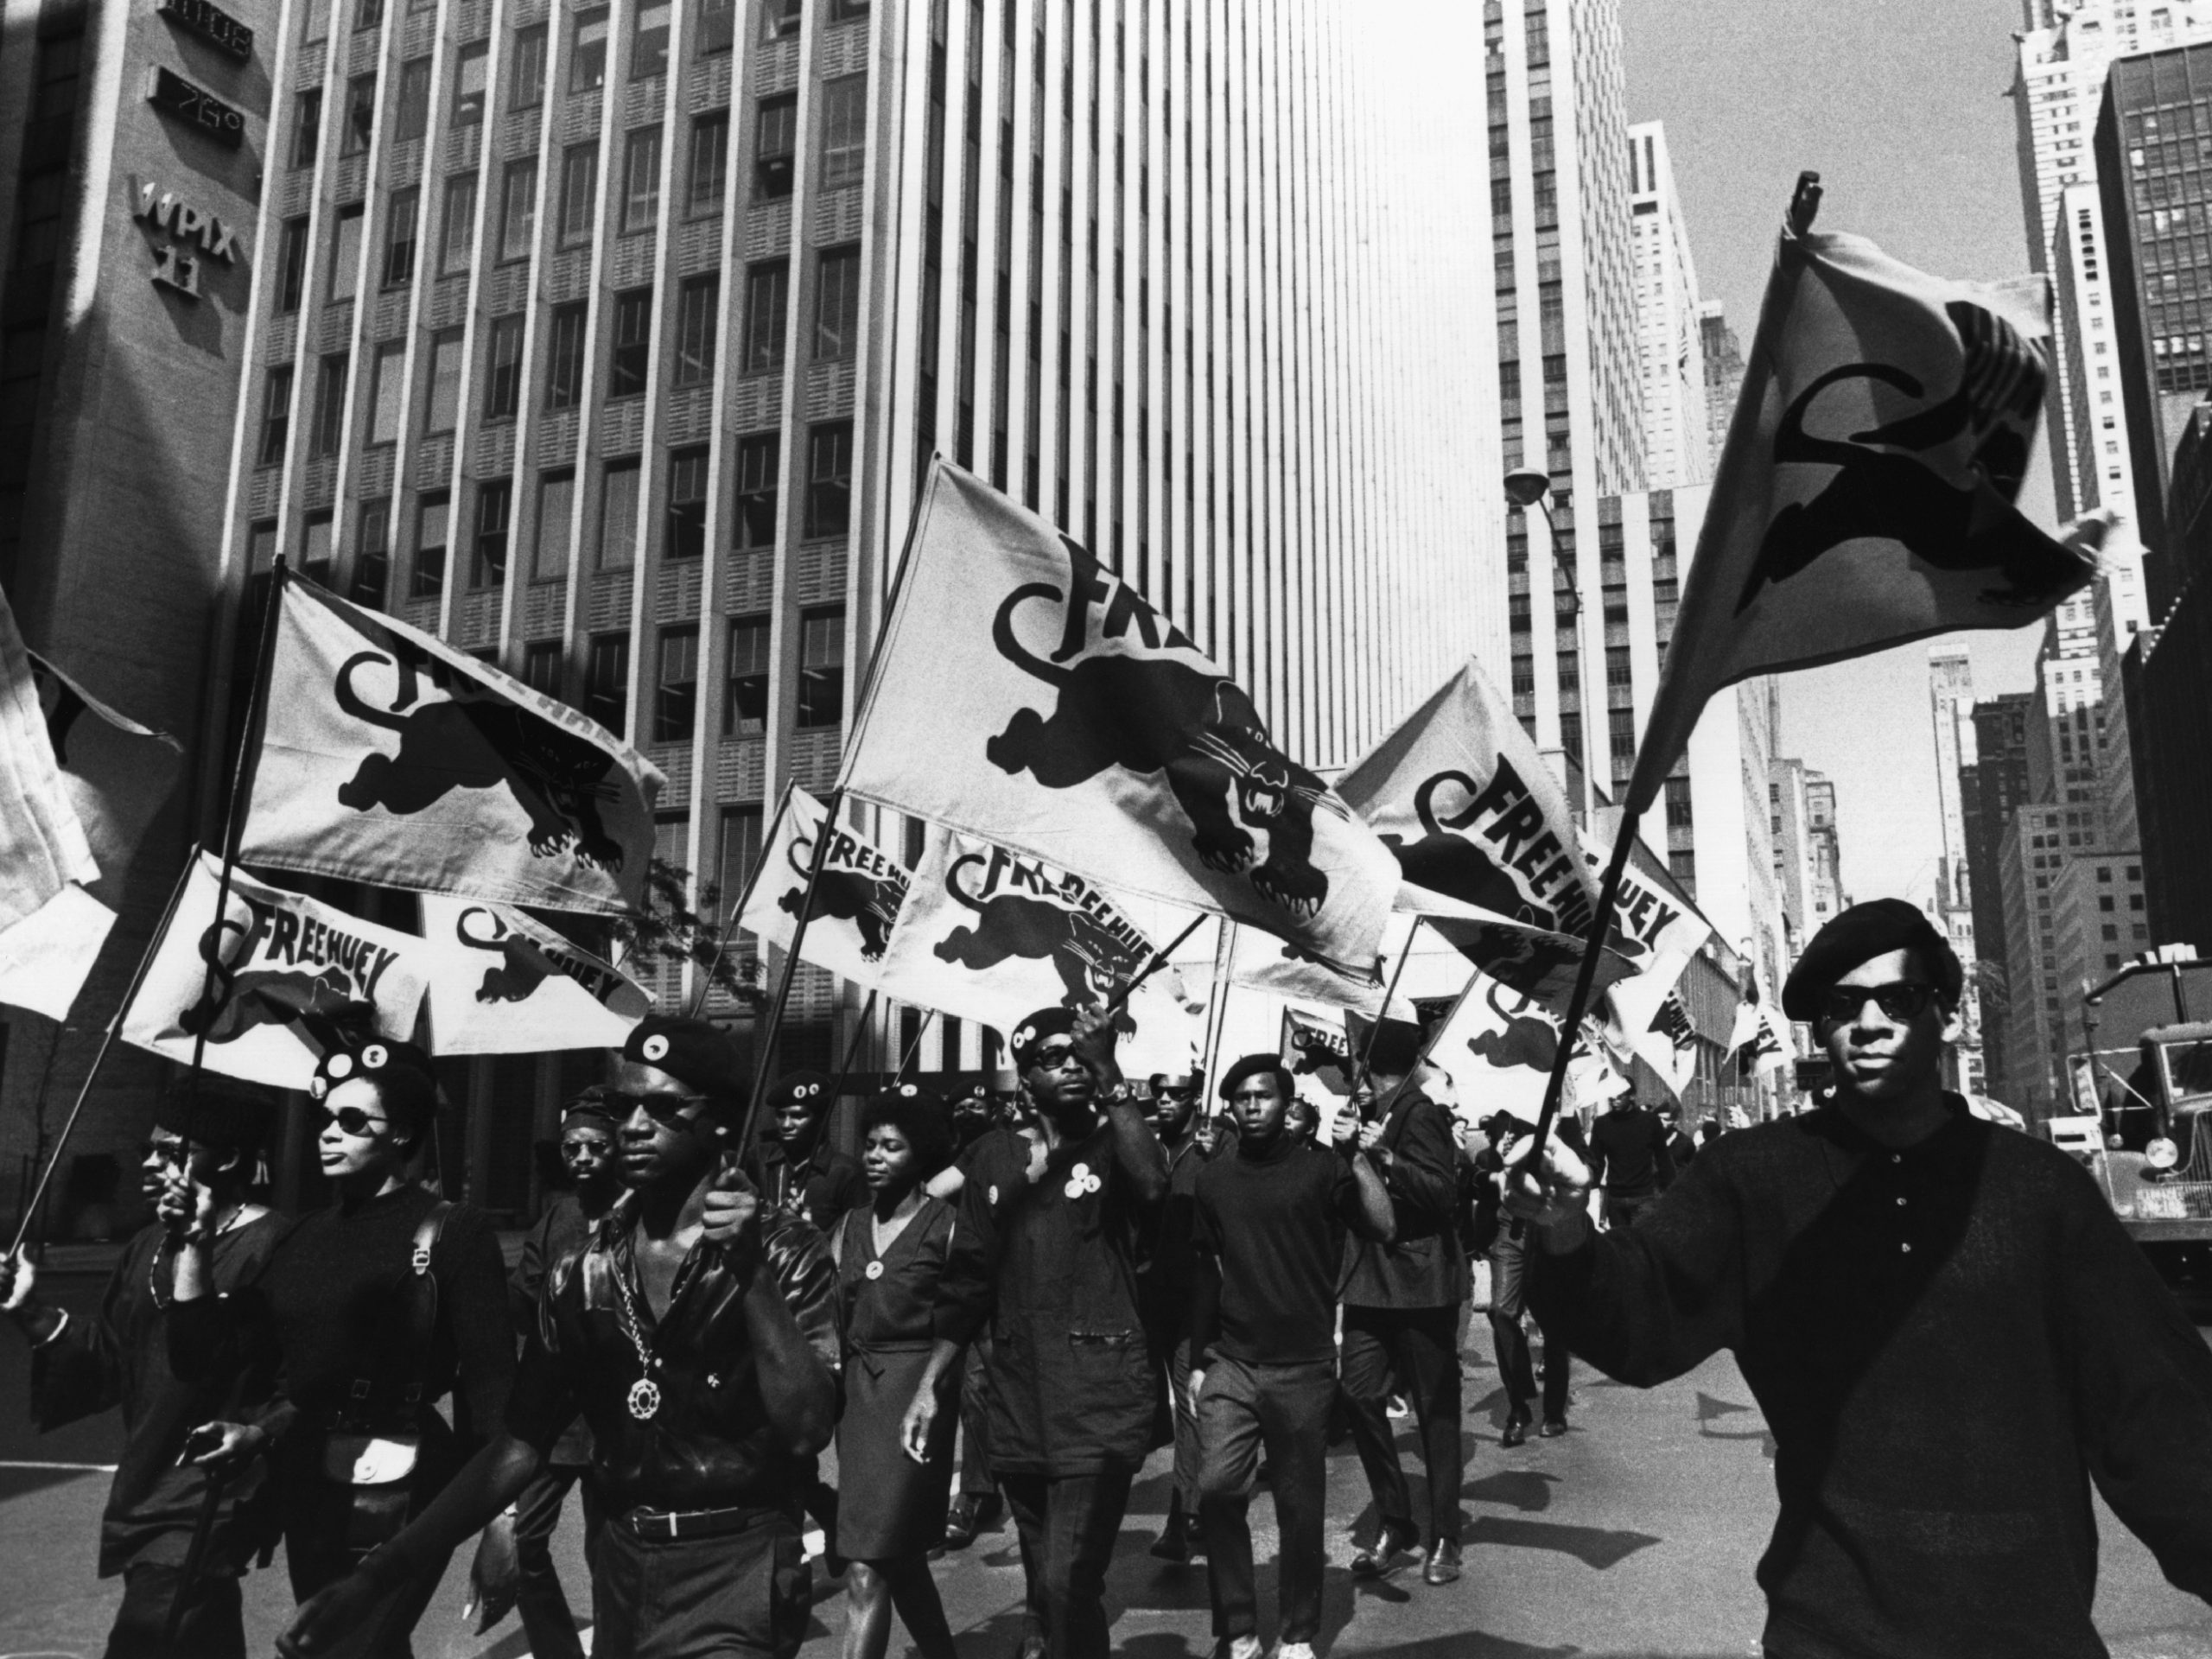 The Socialism of the Black Panthers